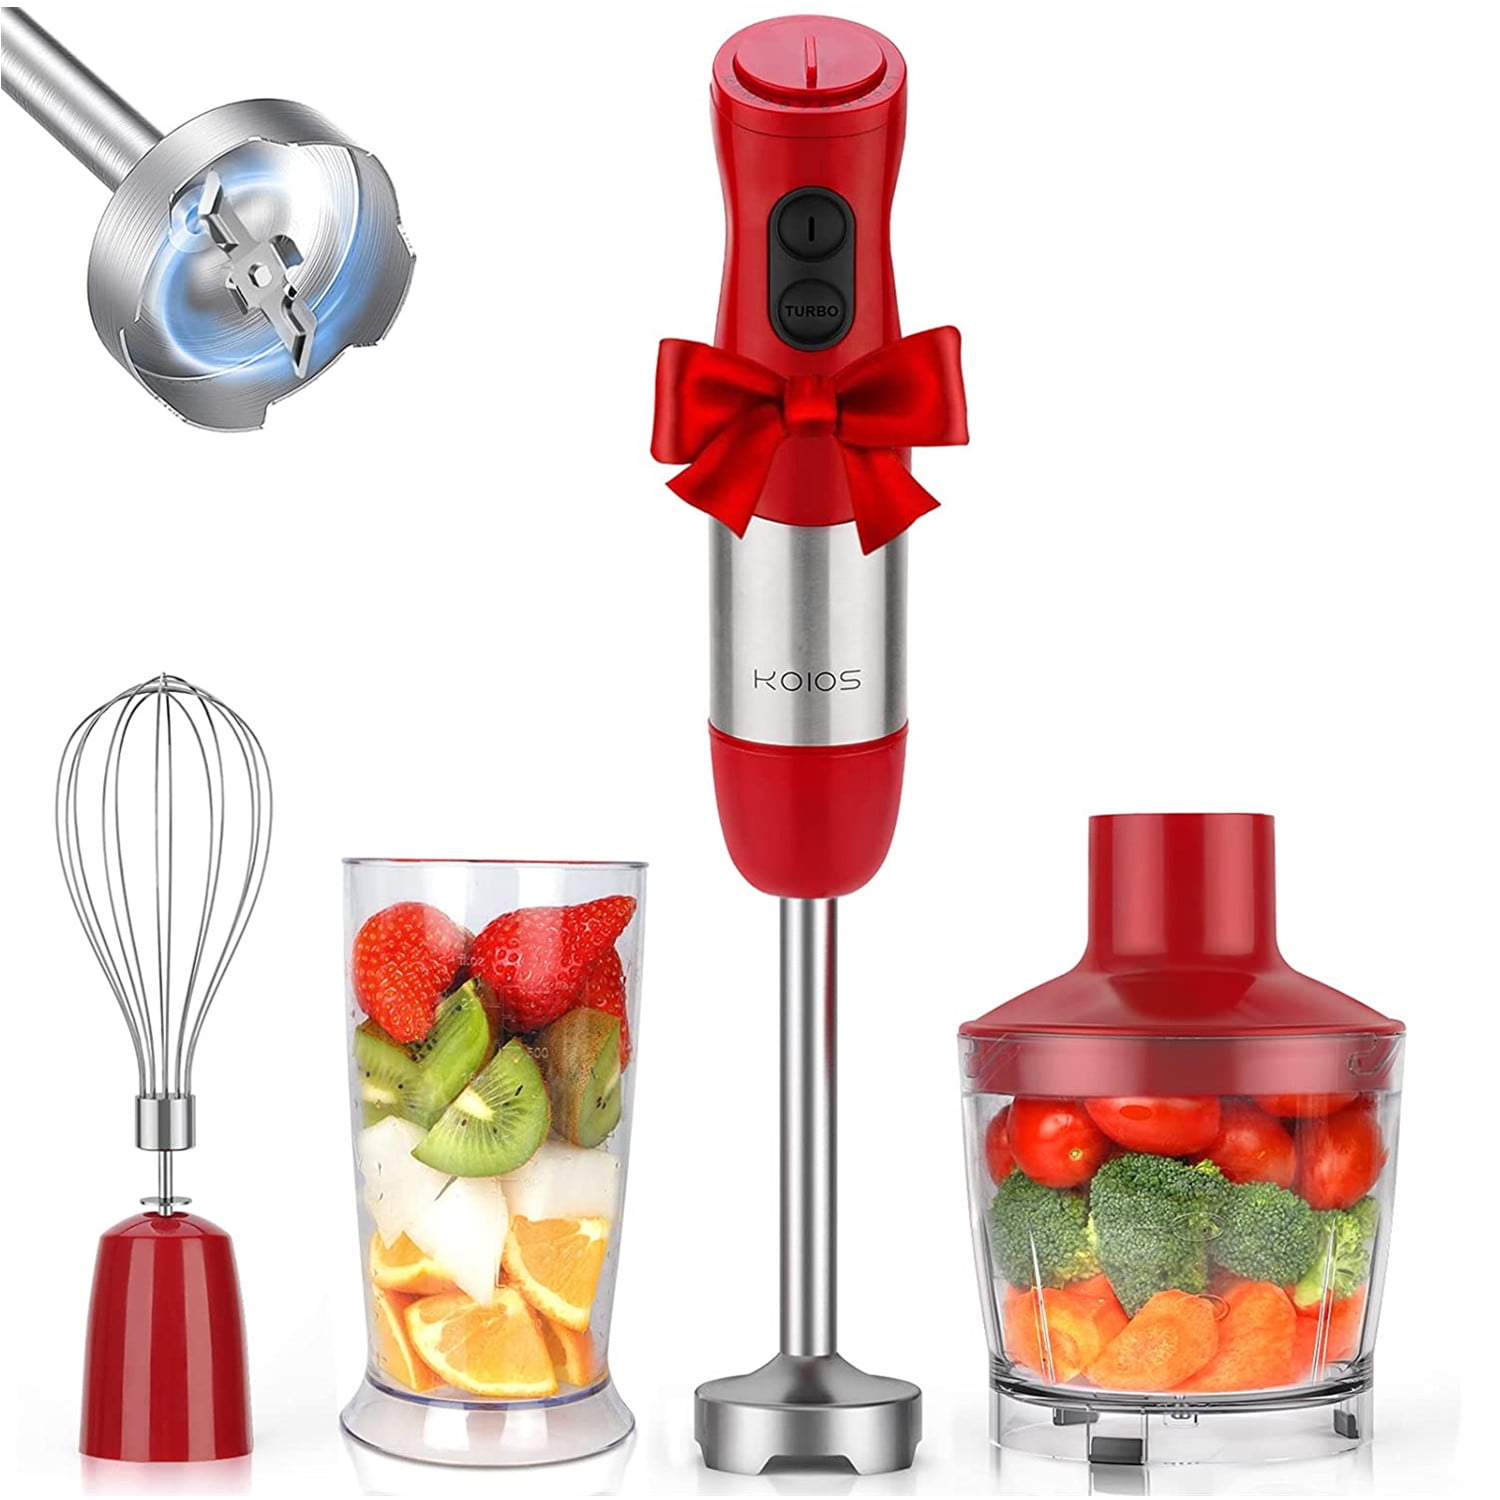  NOZADO 5-in-1 Multi-Function Hand Blender, 1000W Powerful and  Sturdy with 12 Speed Control, BPA Free Containers, Easy to Clean and Safe:  Home & Kitchen